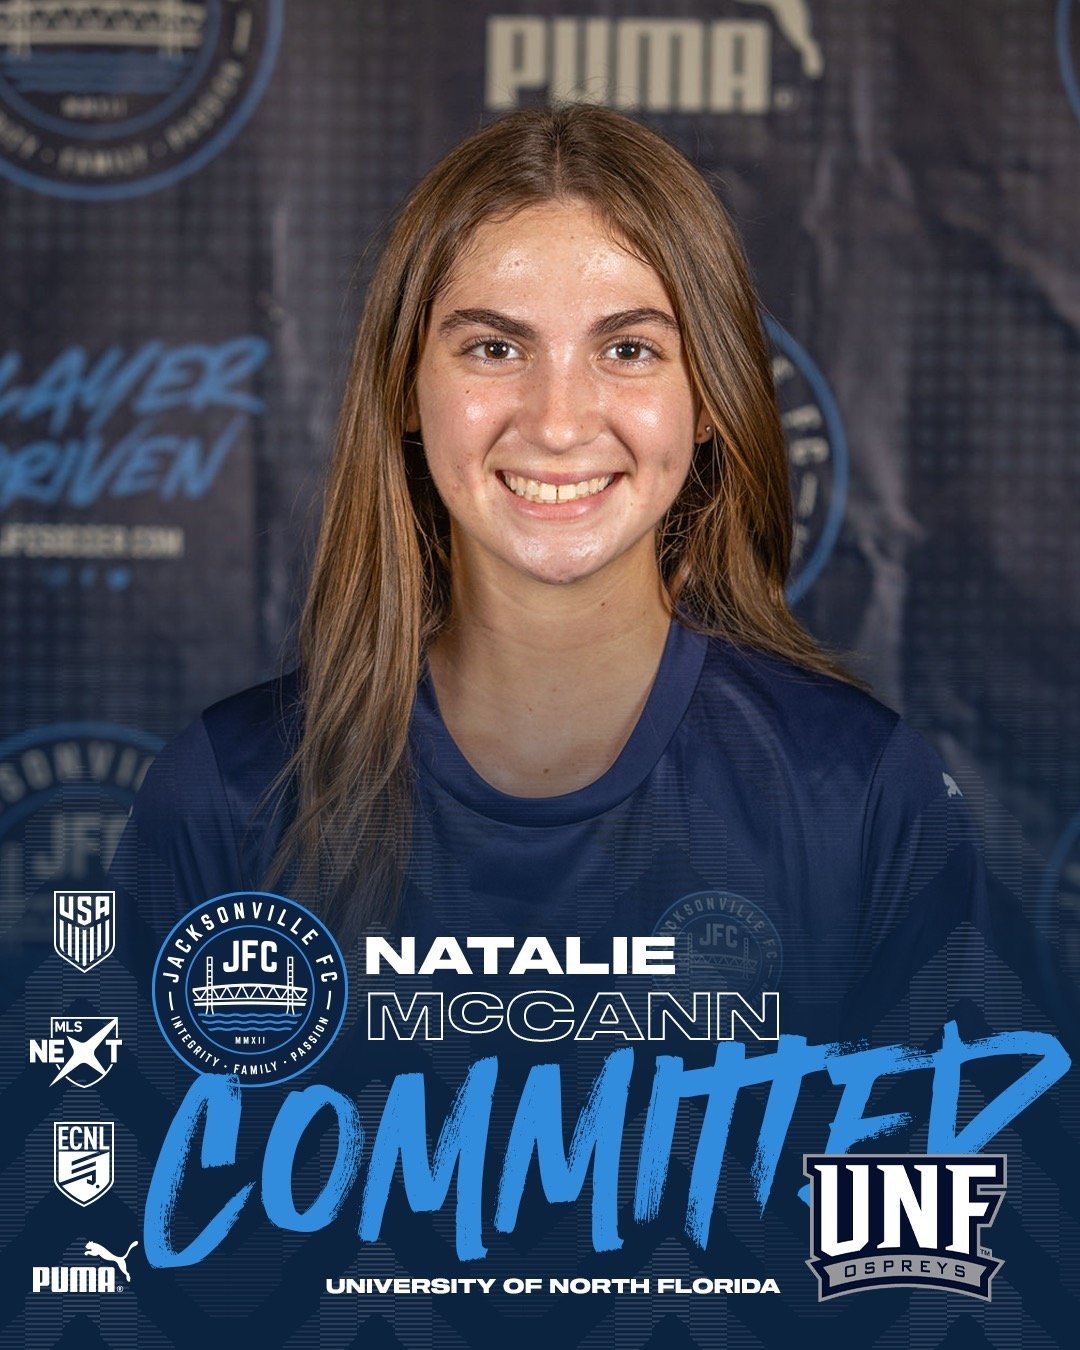 We are thrilled to announce that Natalie McCann has committed to play Division 1 soccer at the University of North Florida! 

Natalie, your hard work, dedication, and passion for the game have led you to this incredible opportunity. We are incredibly